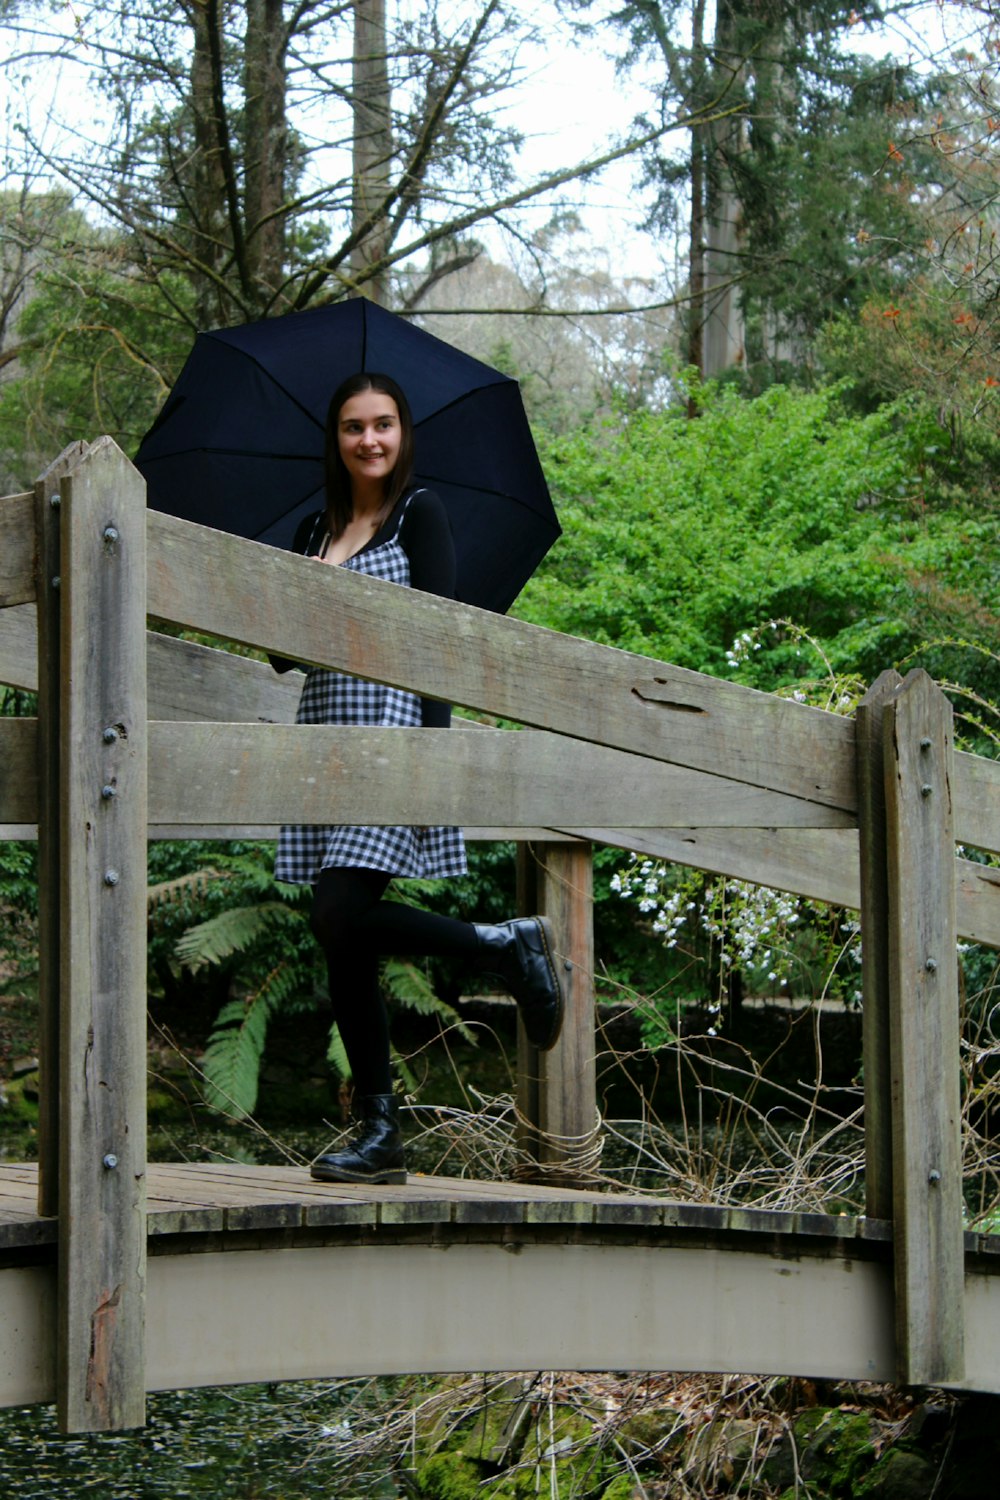 a person sitting on a wooden fence holding an umbrella